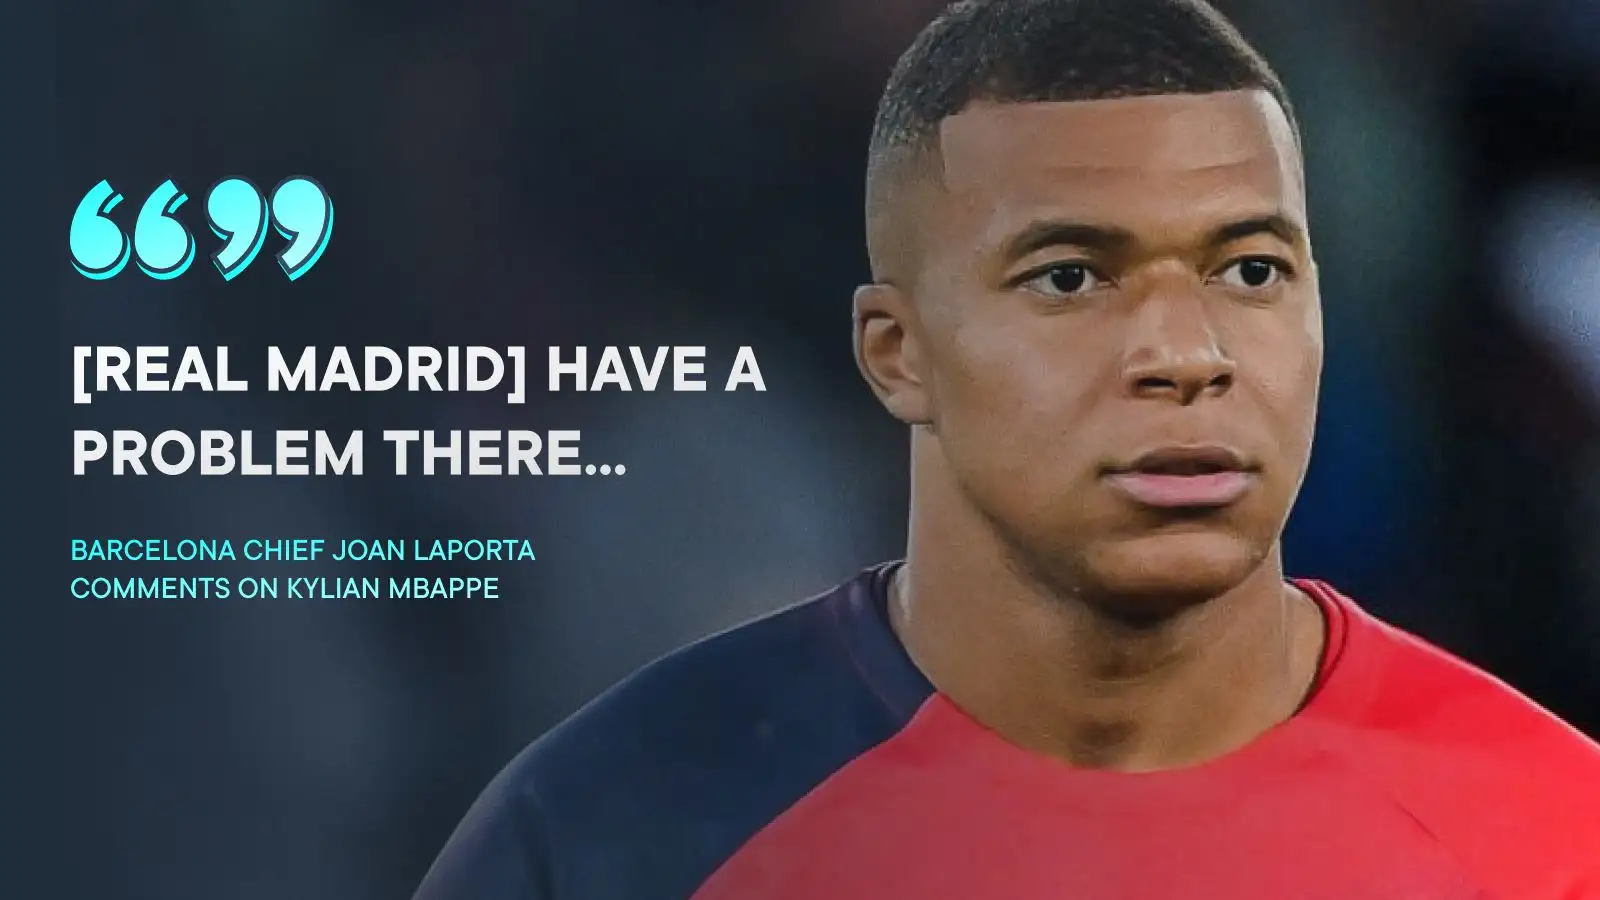 Barcelona chief on Mbappe